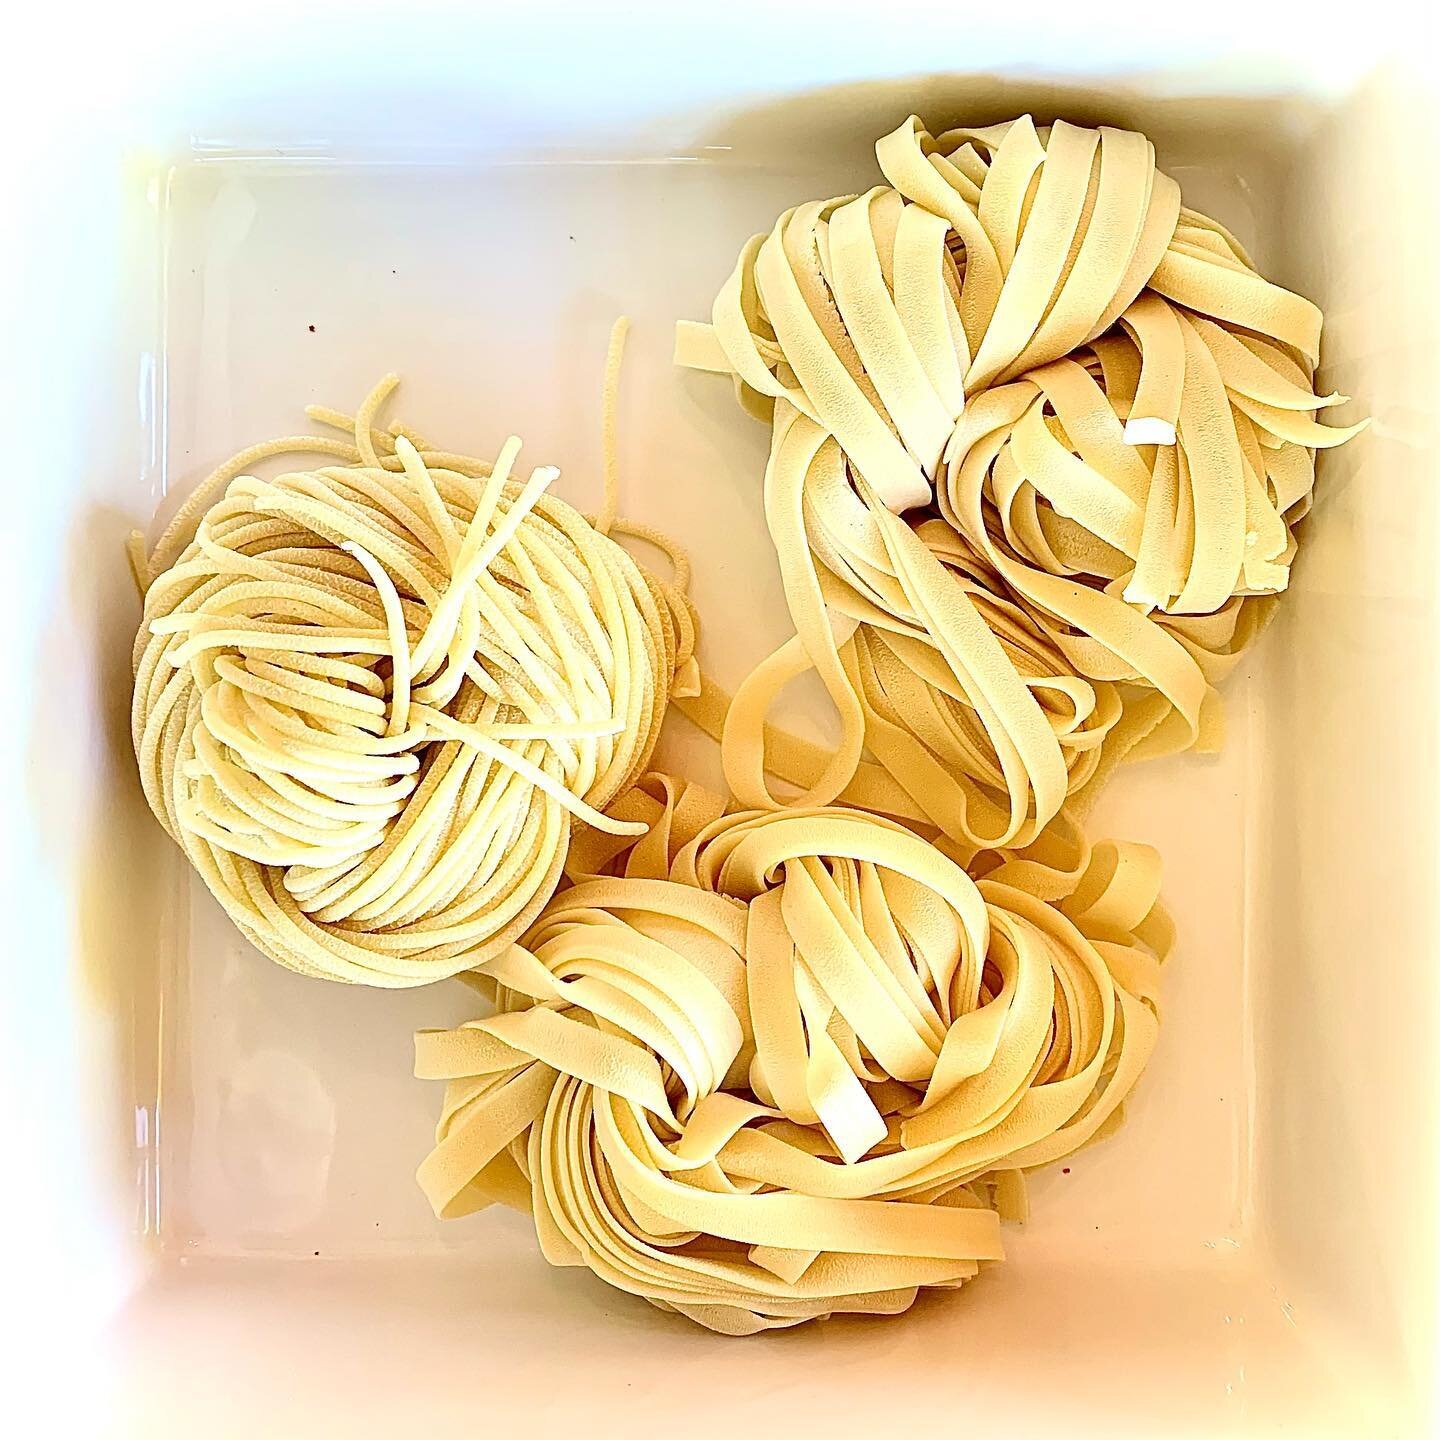 Get your fresh pasta from us starting this weekend! Made in house daily. Pair it with Jules and Kent Pasta Sauces or make your own. We&rsquo;ve got all the ingredients you need. #westend #yvr #localbusiness #goodfood #freshmarket